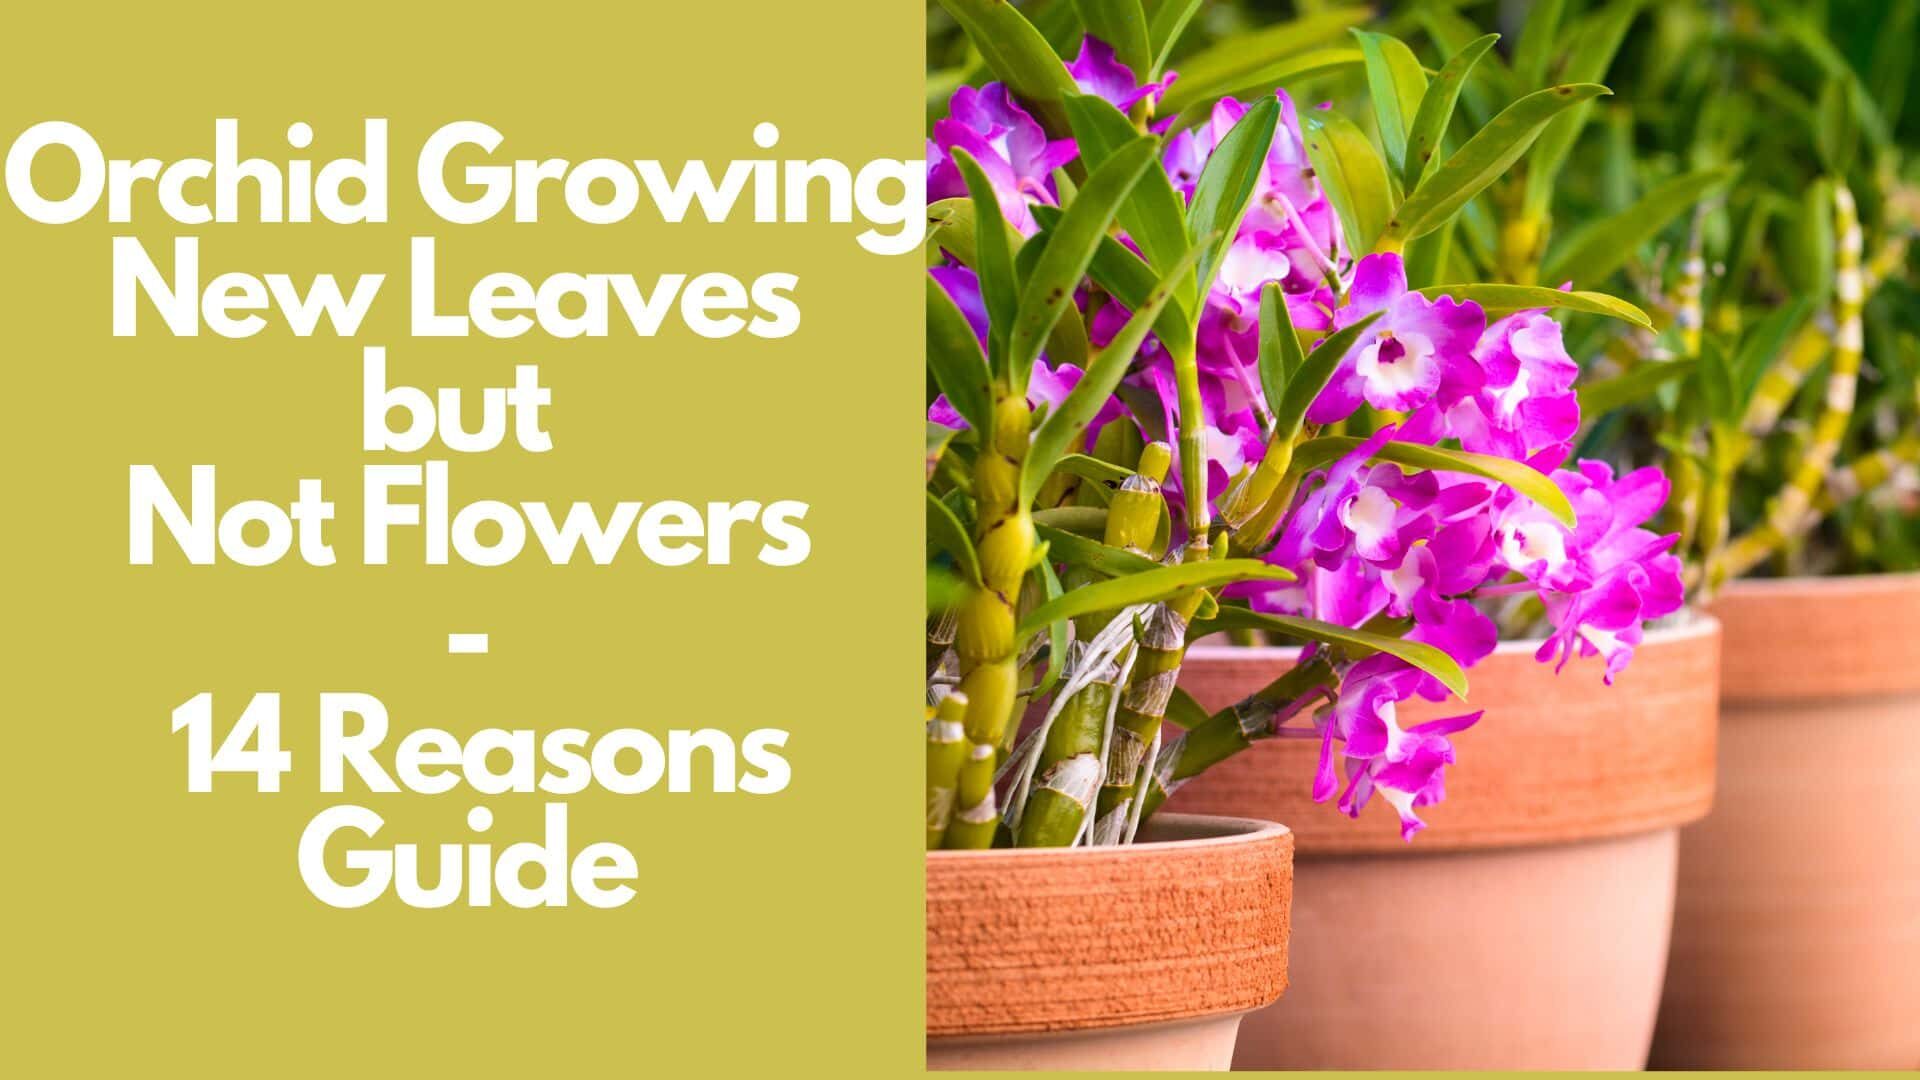 Orchid Growing New Leaves but Not Flowers: 14 Reasons Guide 